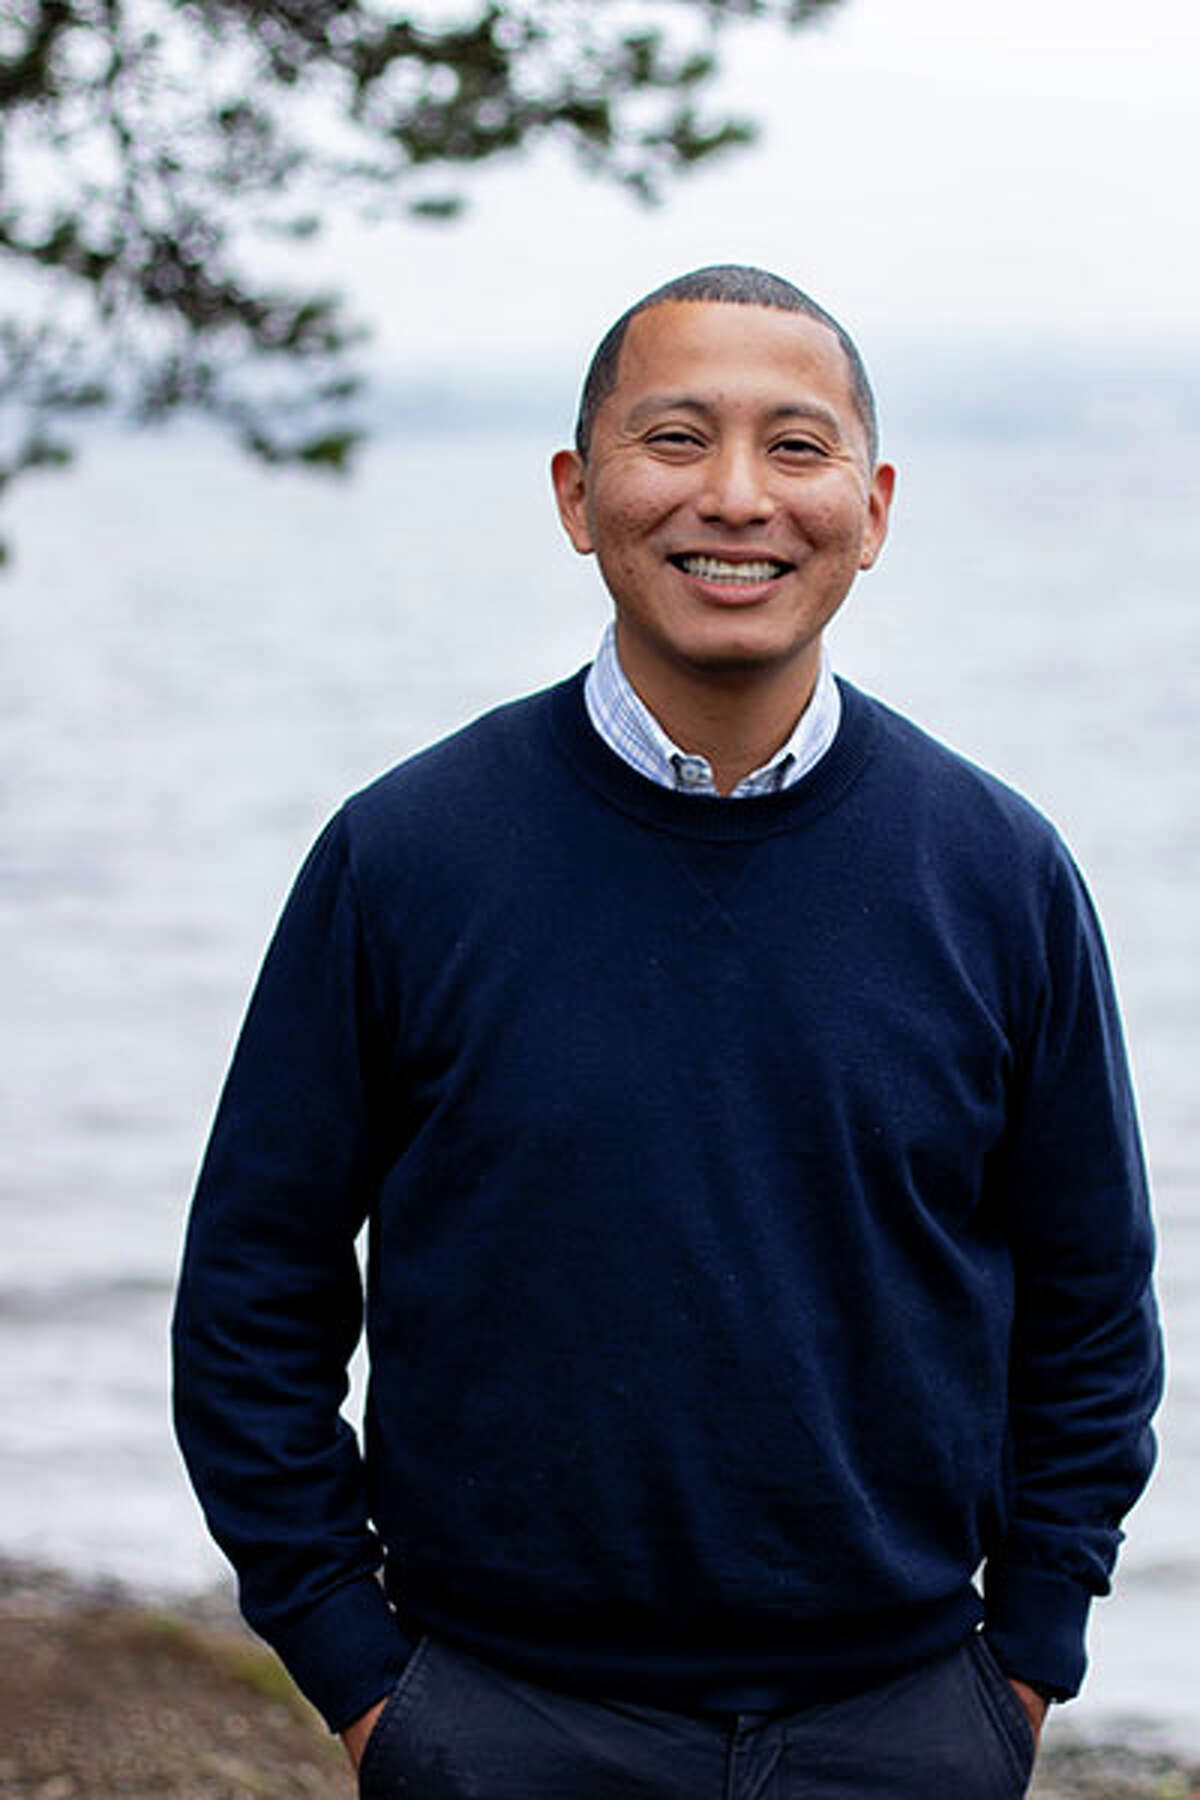 Abel Pacheco, director of strategic engagement for a University of Washington STEM (science, technology, engineering and math) program, Pacheco will fill the District 4 seat vacated by former Council member Rob Johnson.